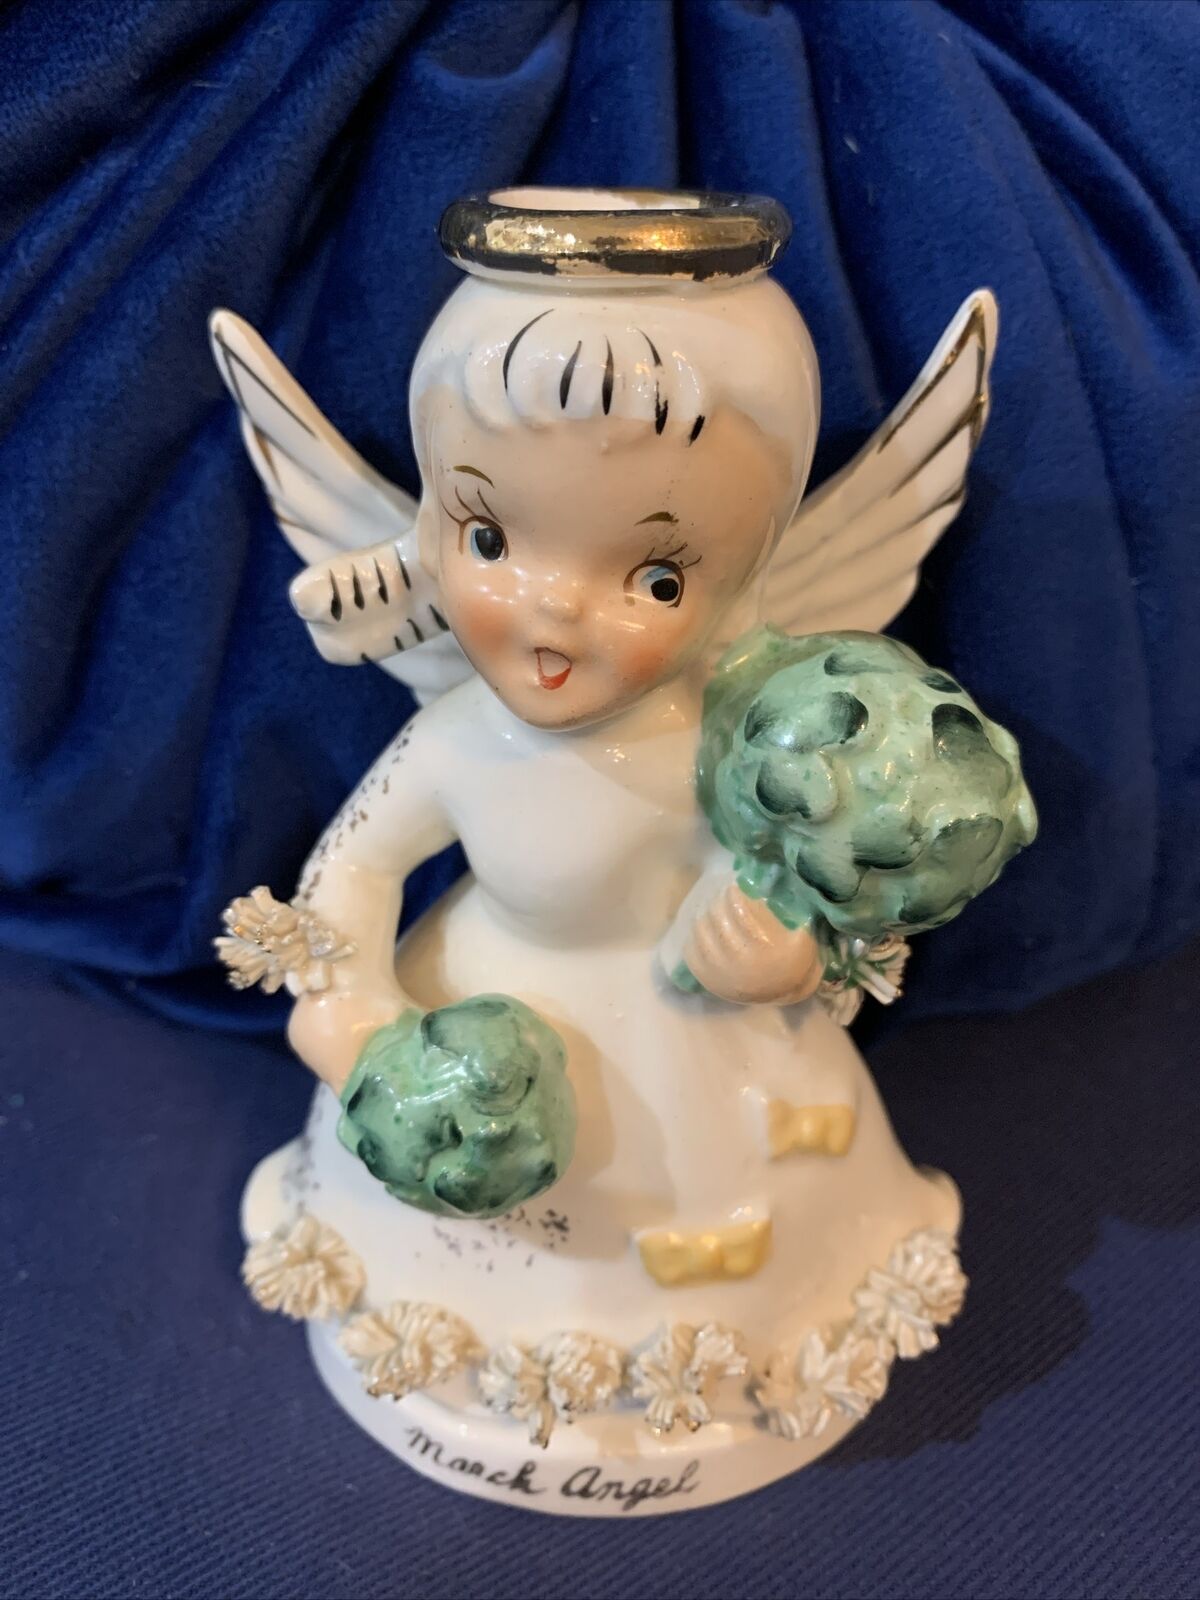 Vintage 1956 Napco Angel of the Month Figurine March Girl Japan